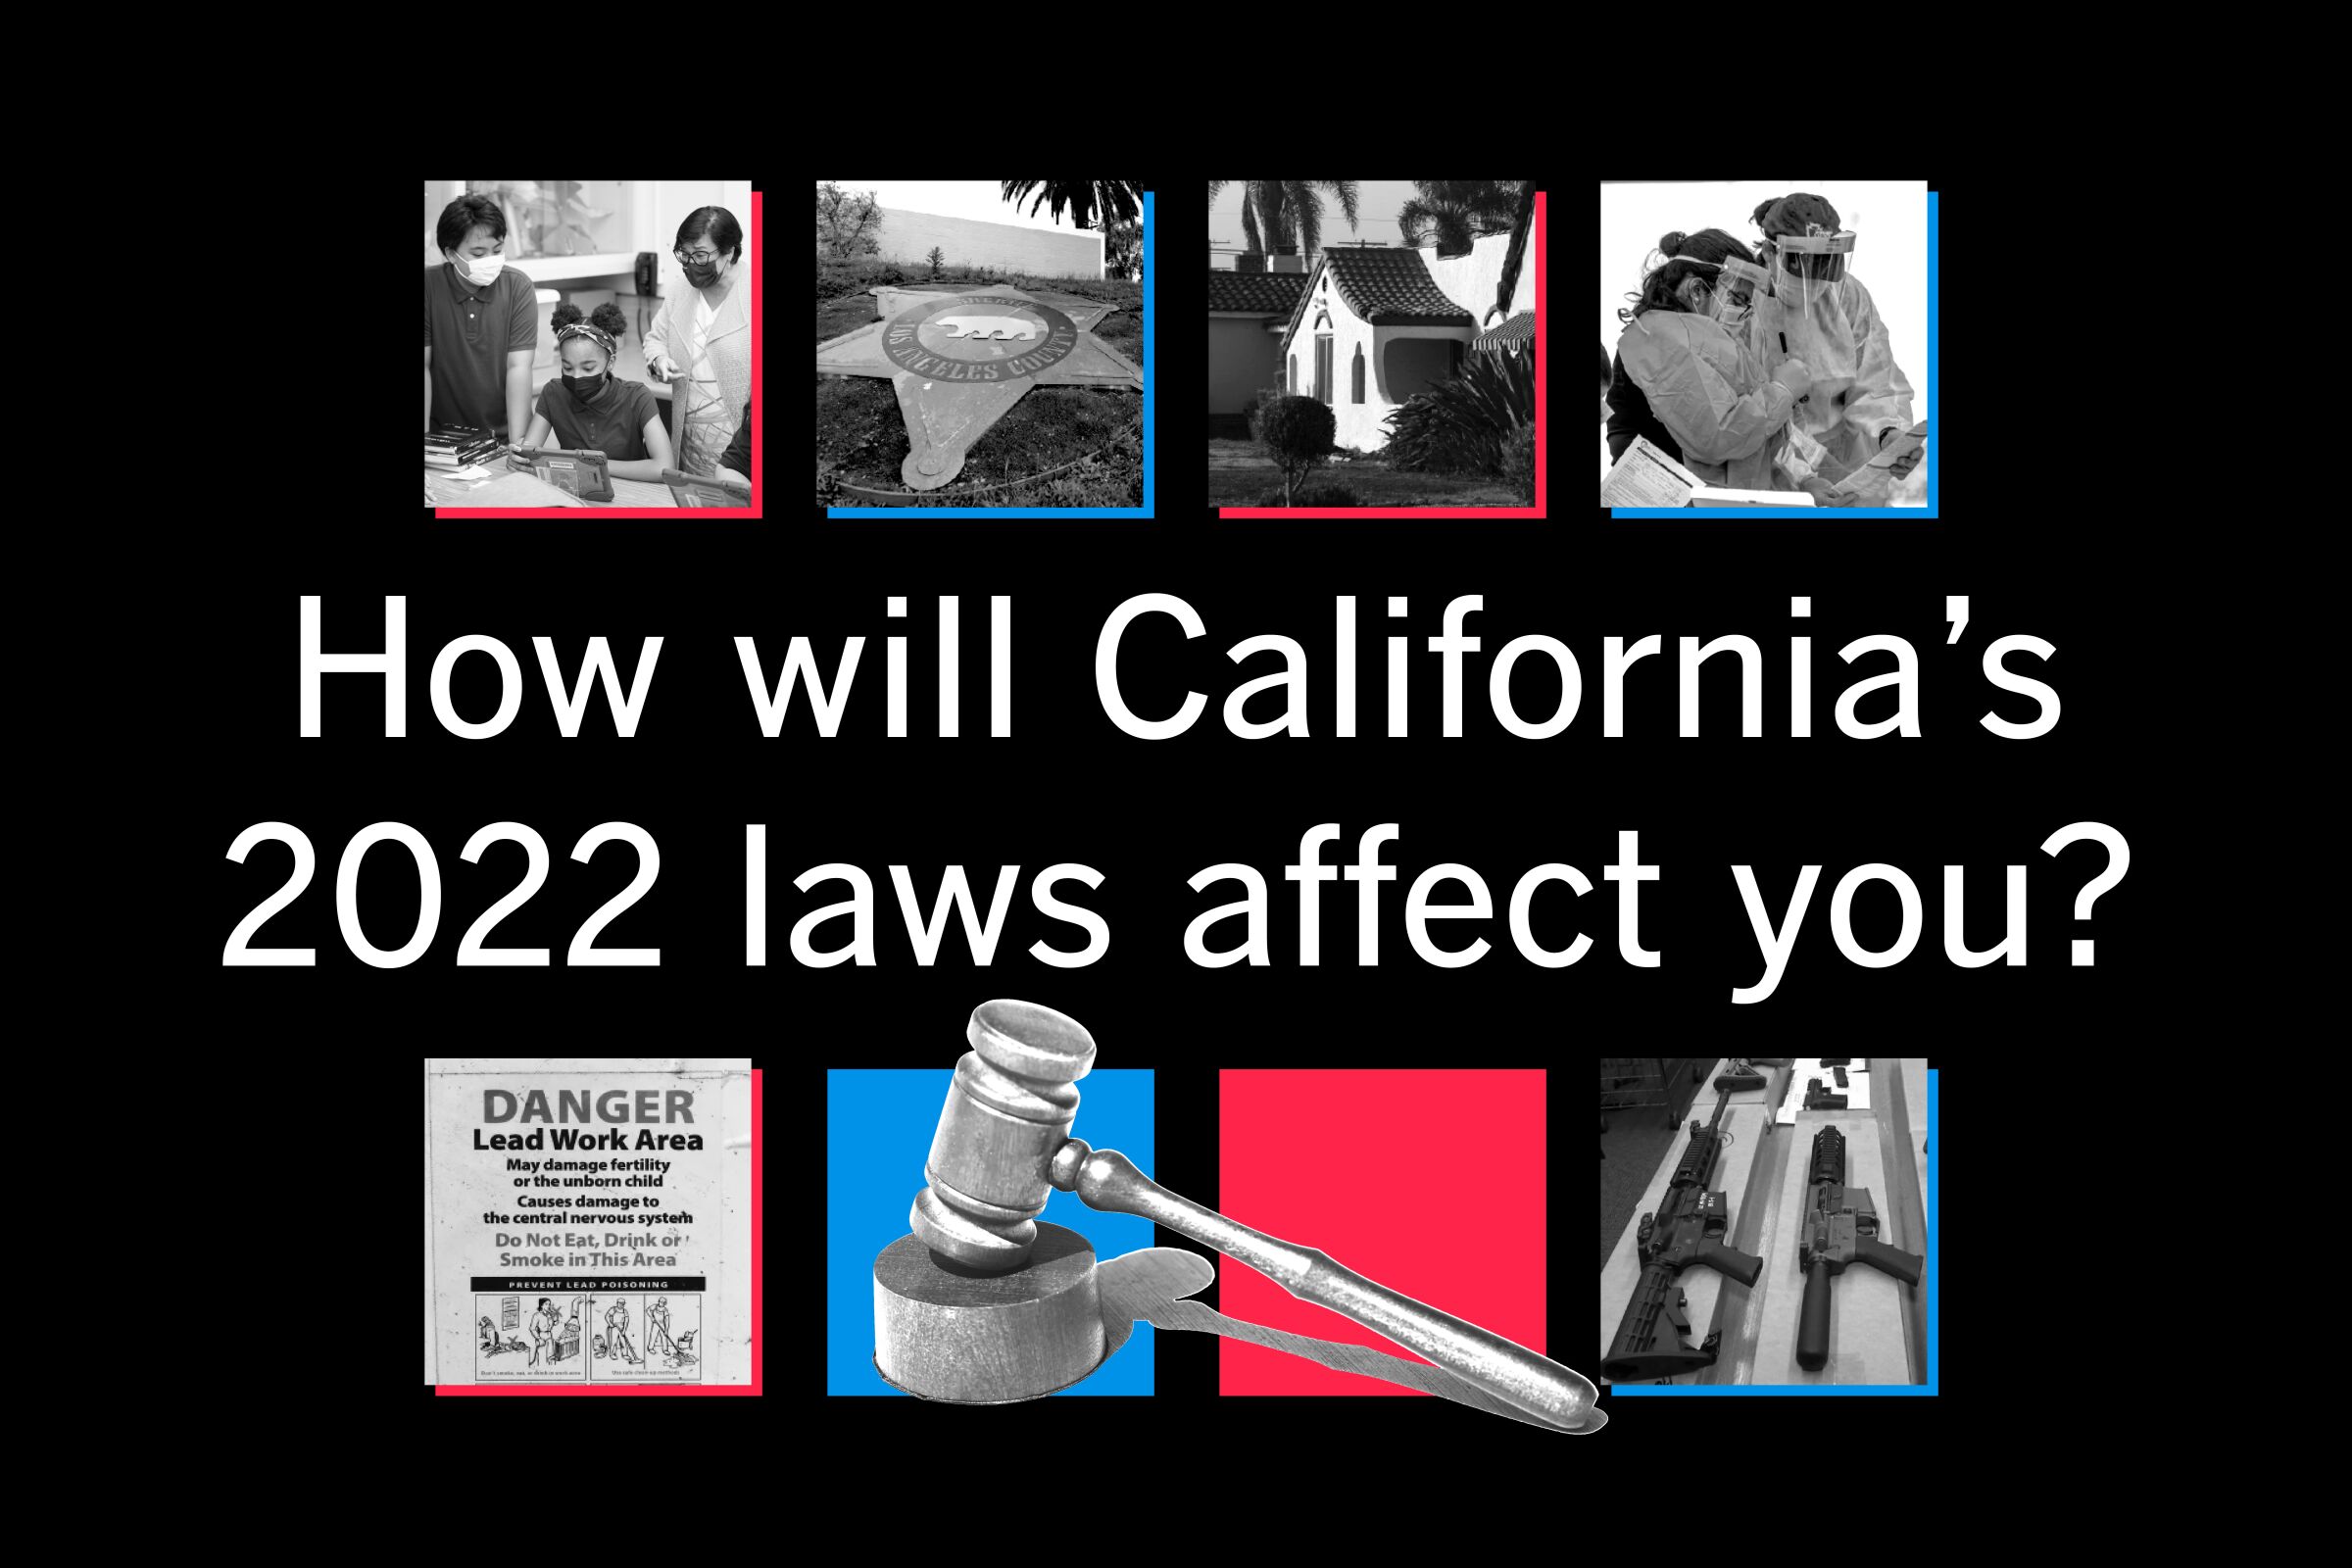 New 2022 California laws on COVID19, housing and policing Pomerado News